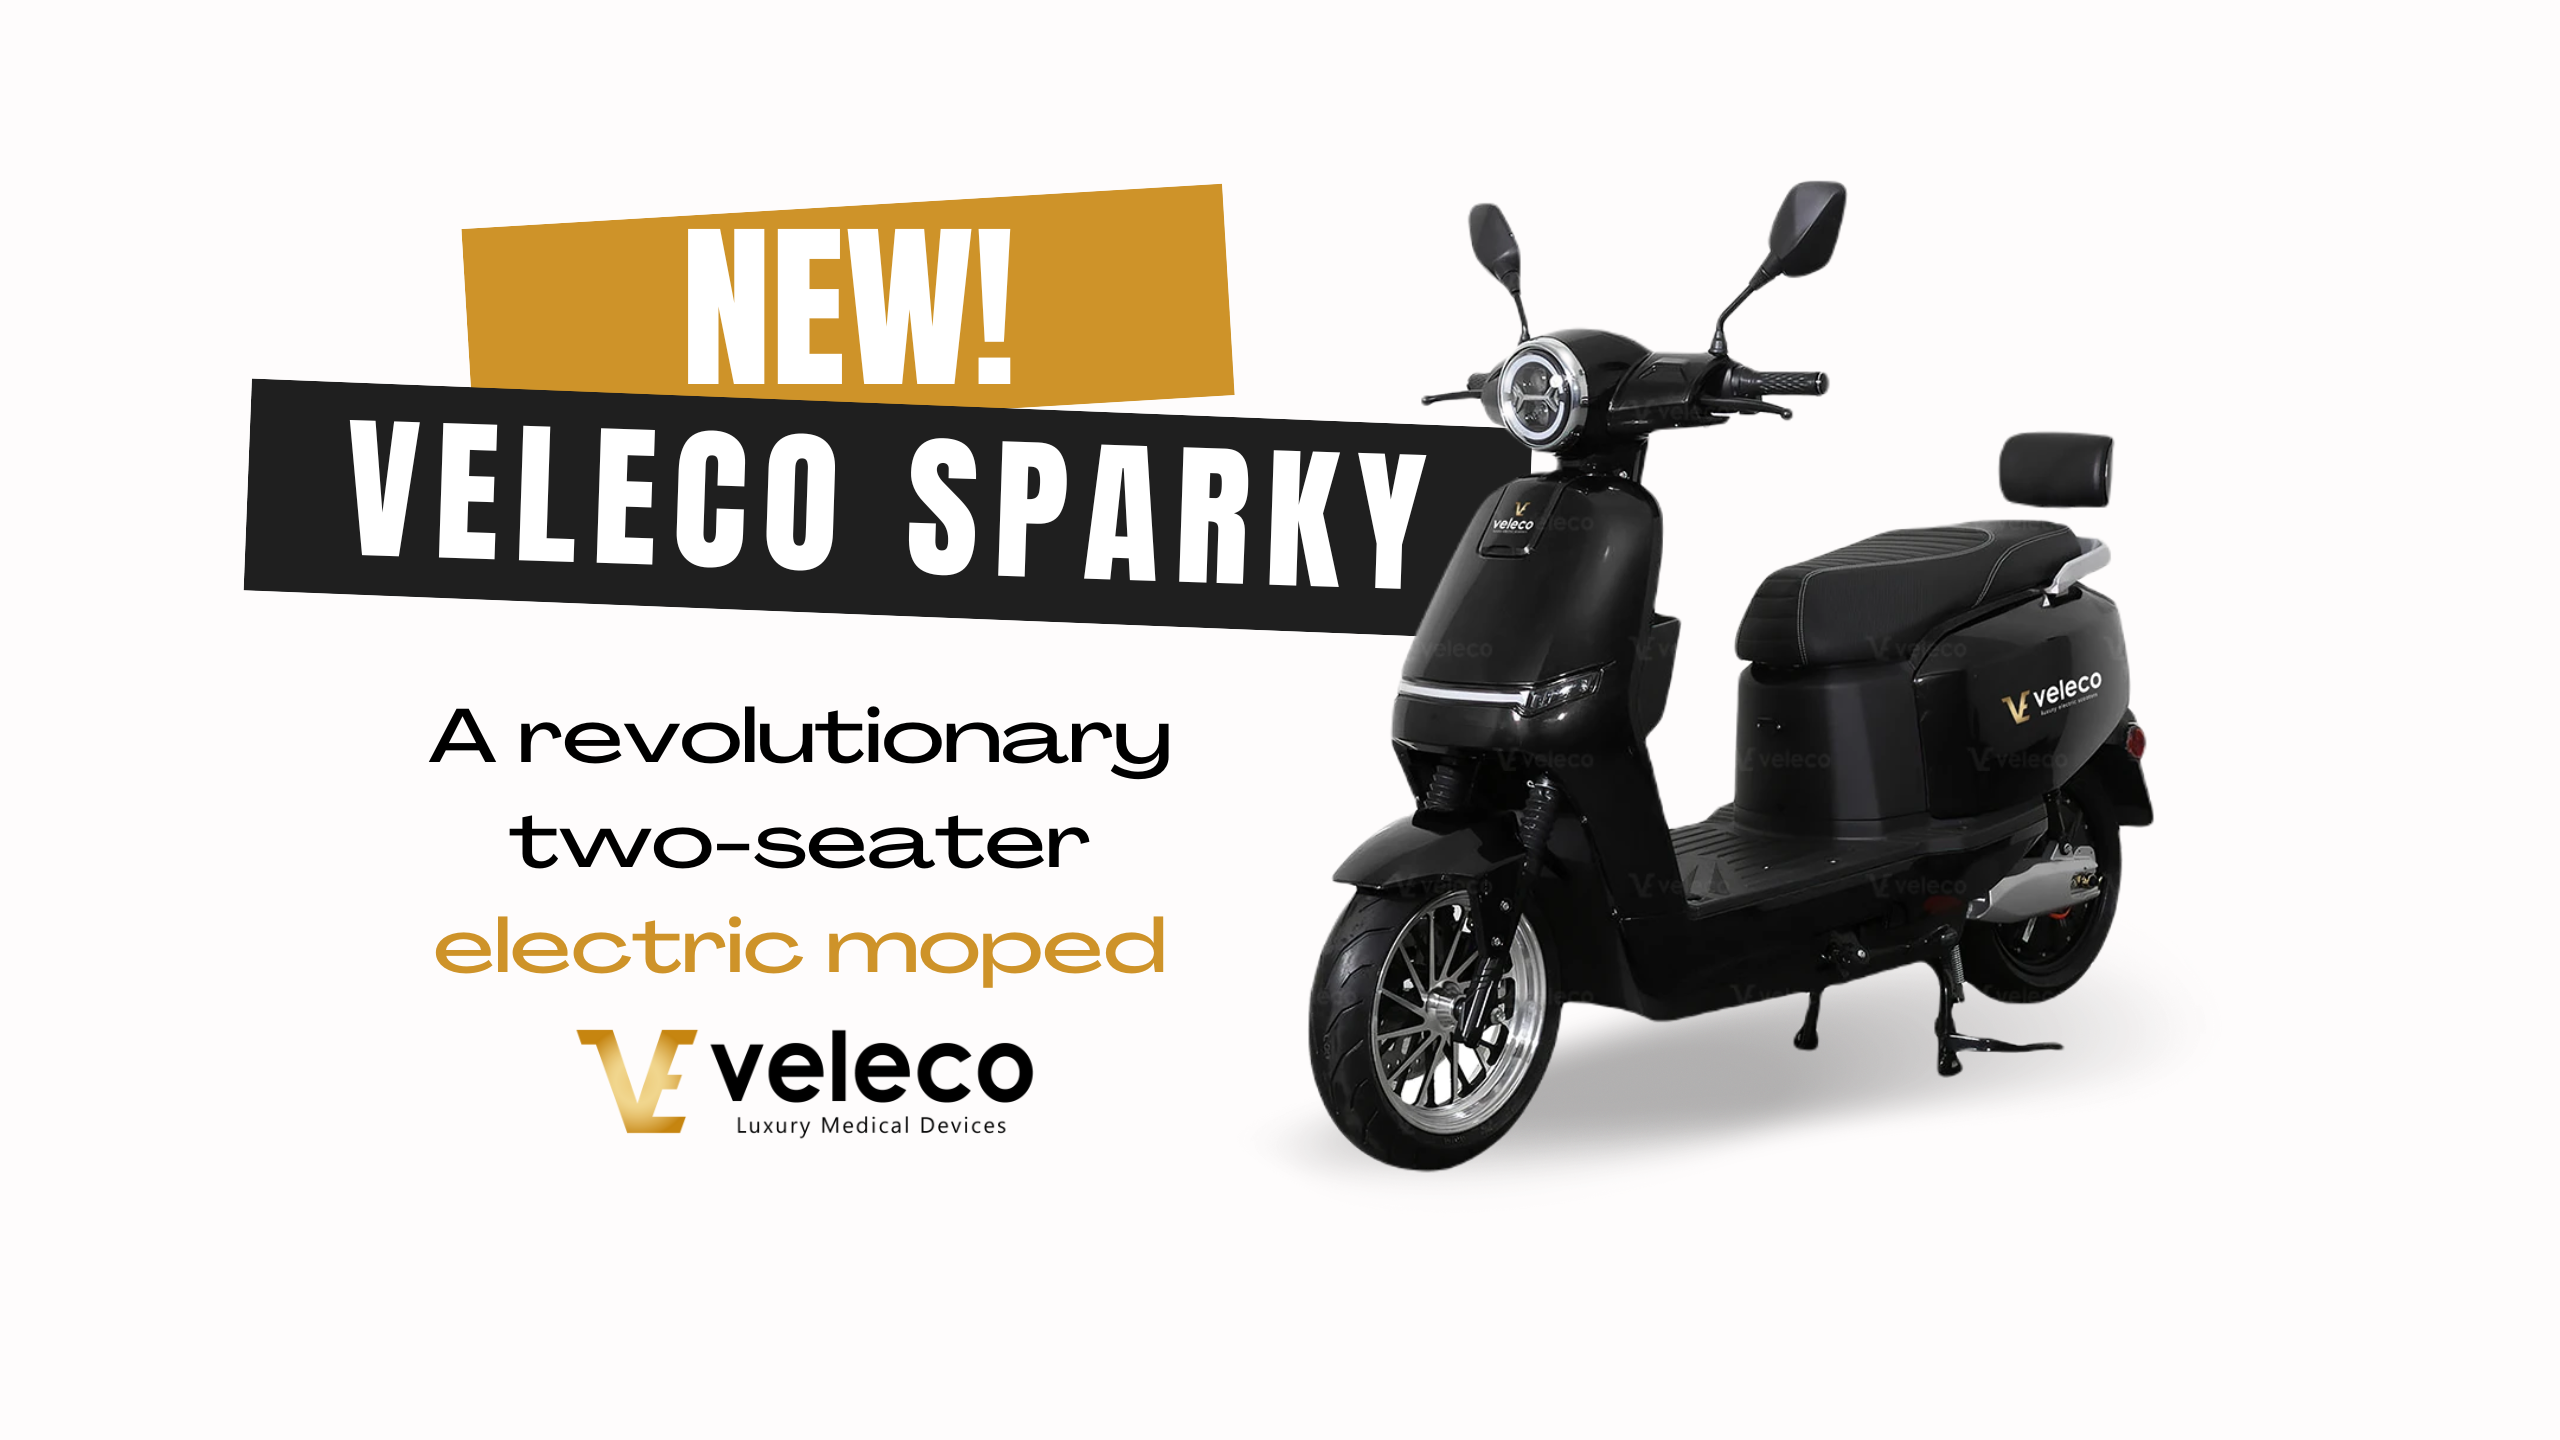 Veleco SPARKY - two-seater electric moped - new on offer - Veleco blog post